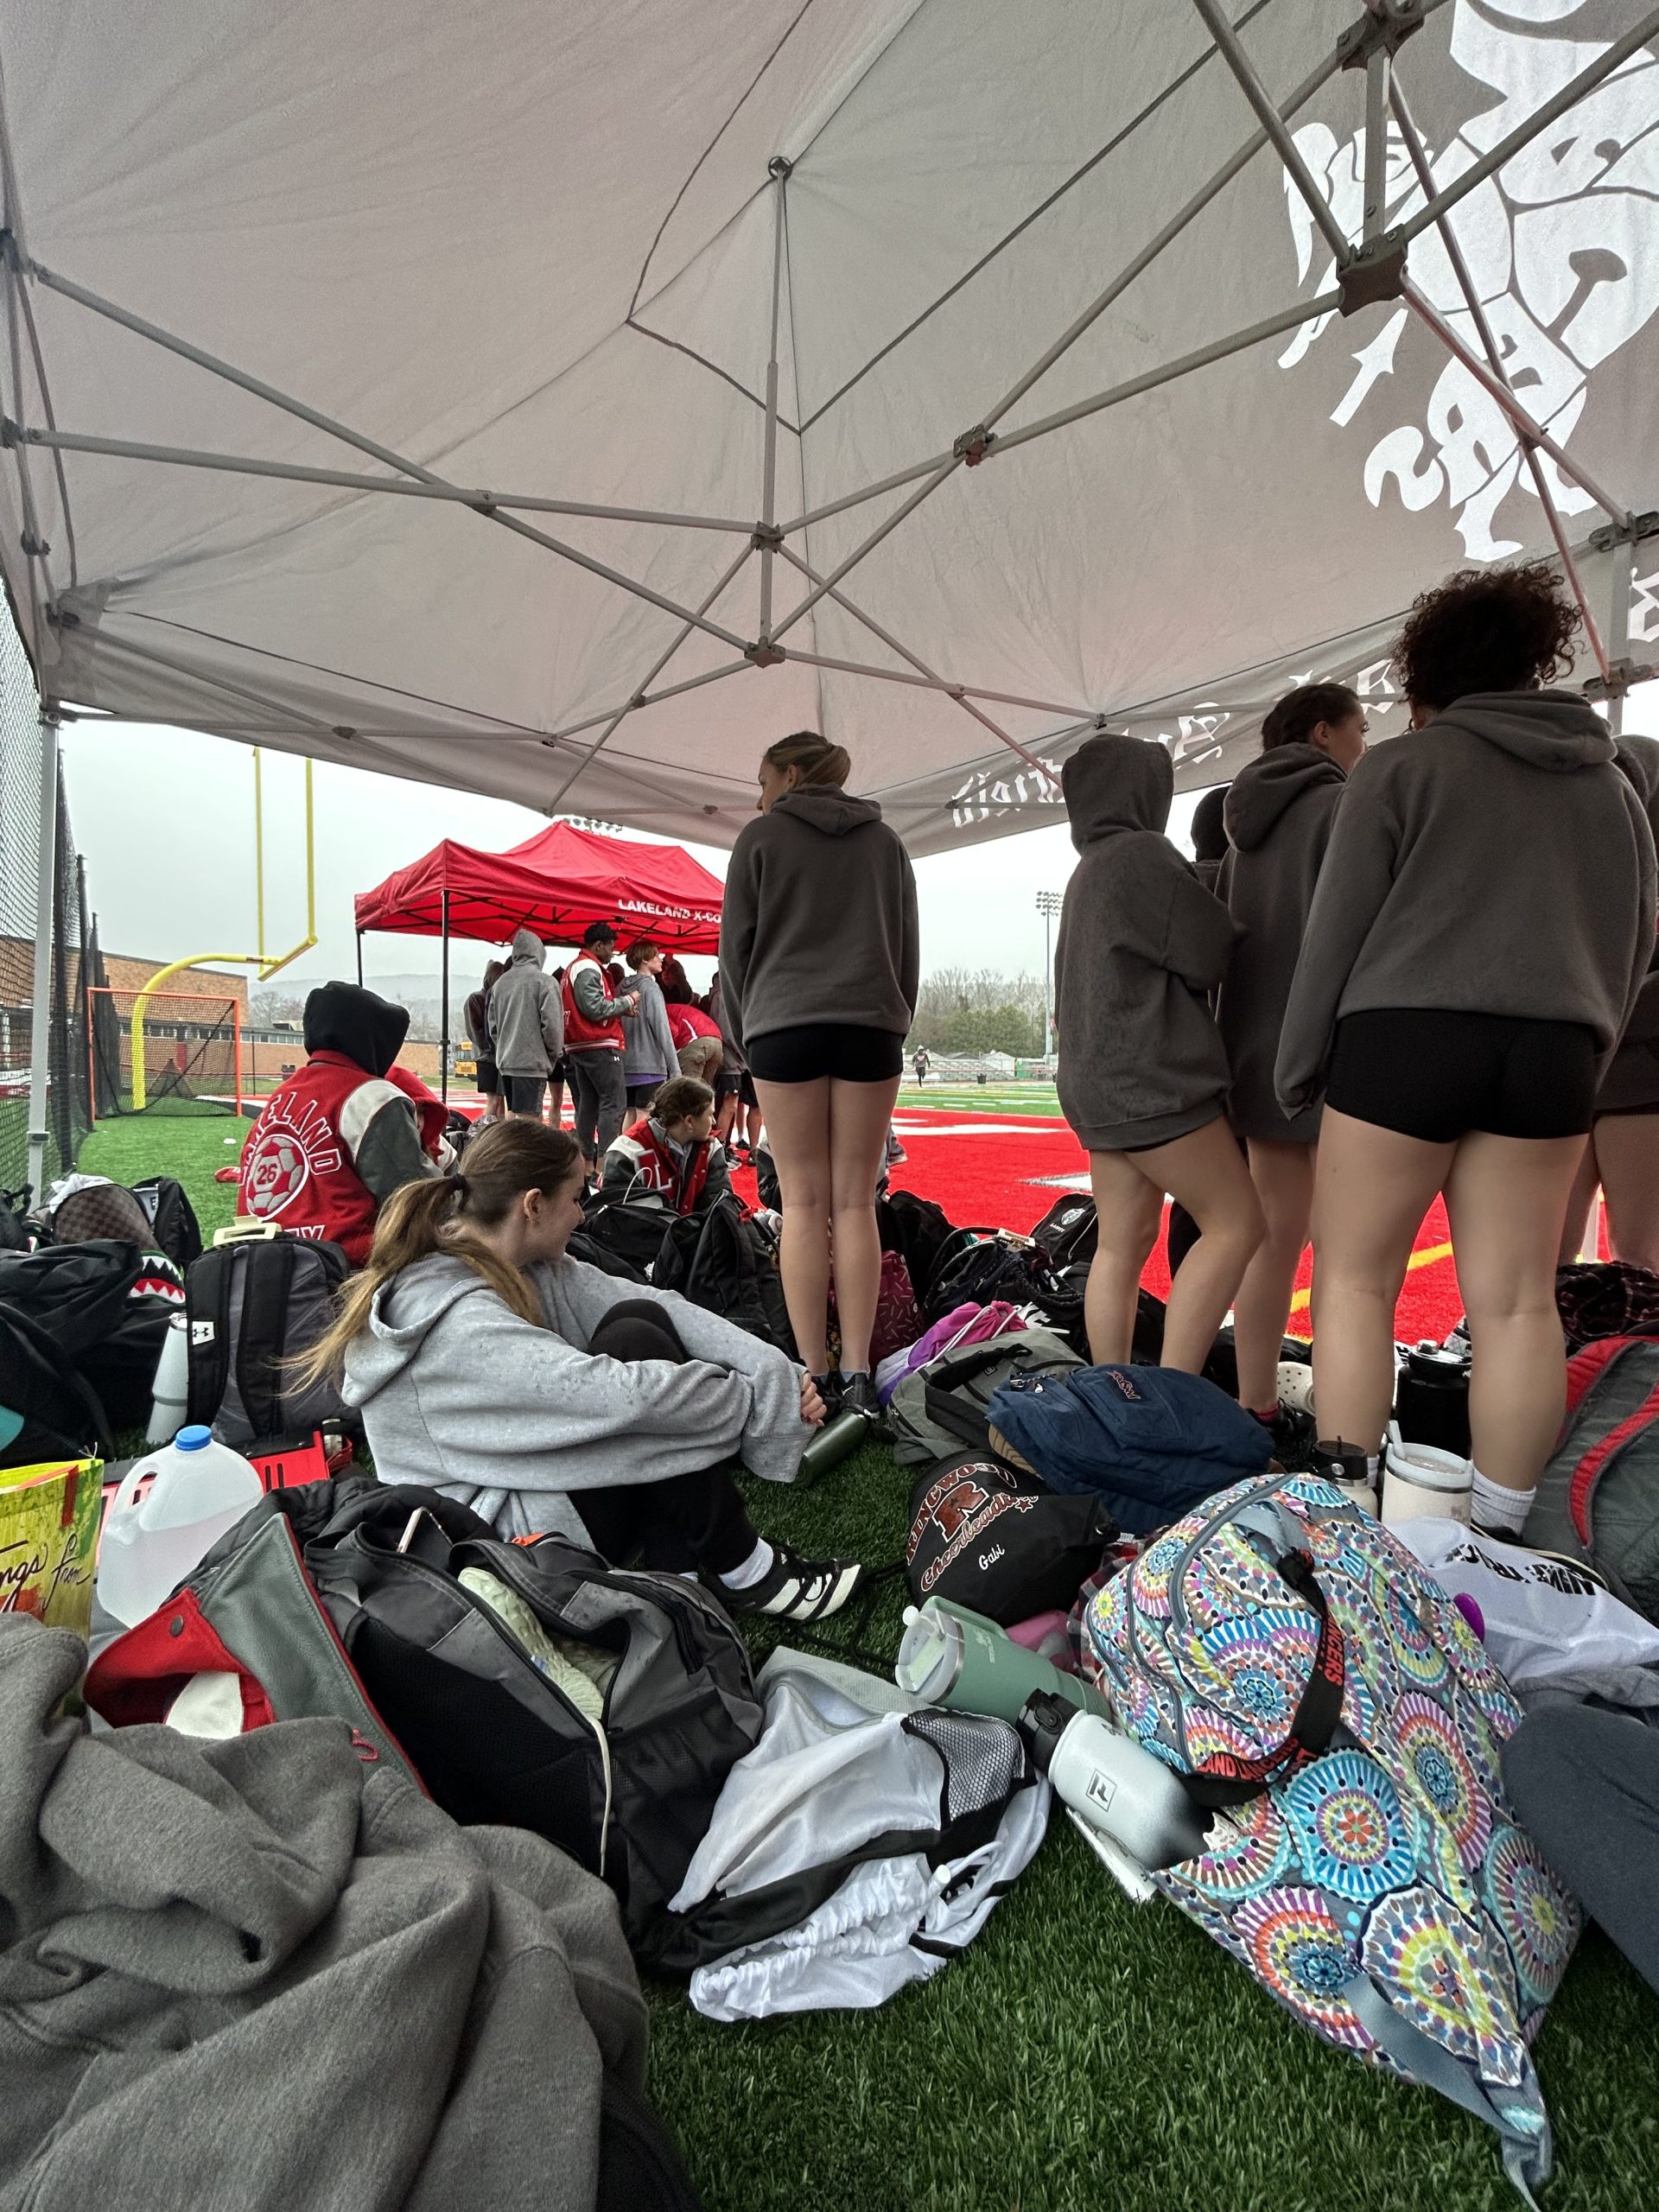 The Lakeland track team huddles underneath a tent during their first scrimmage of the season.